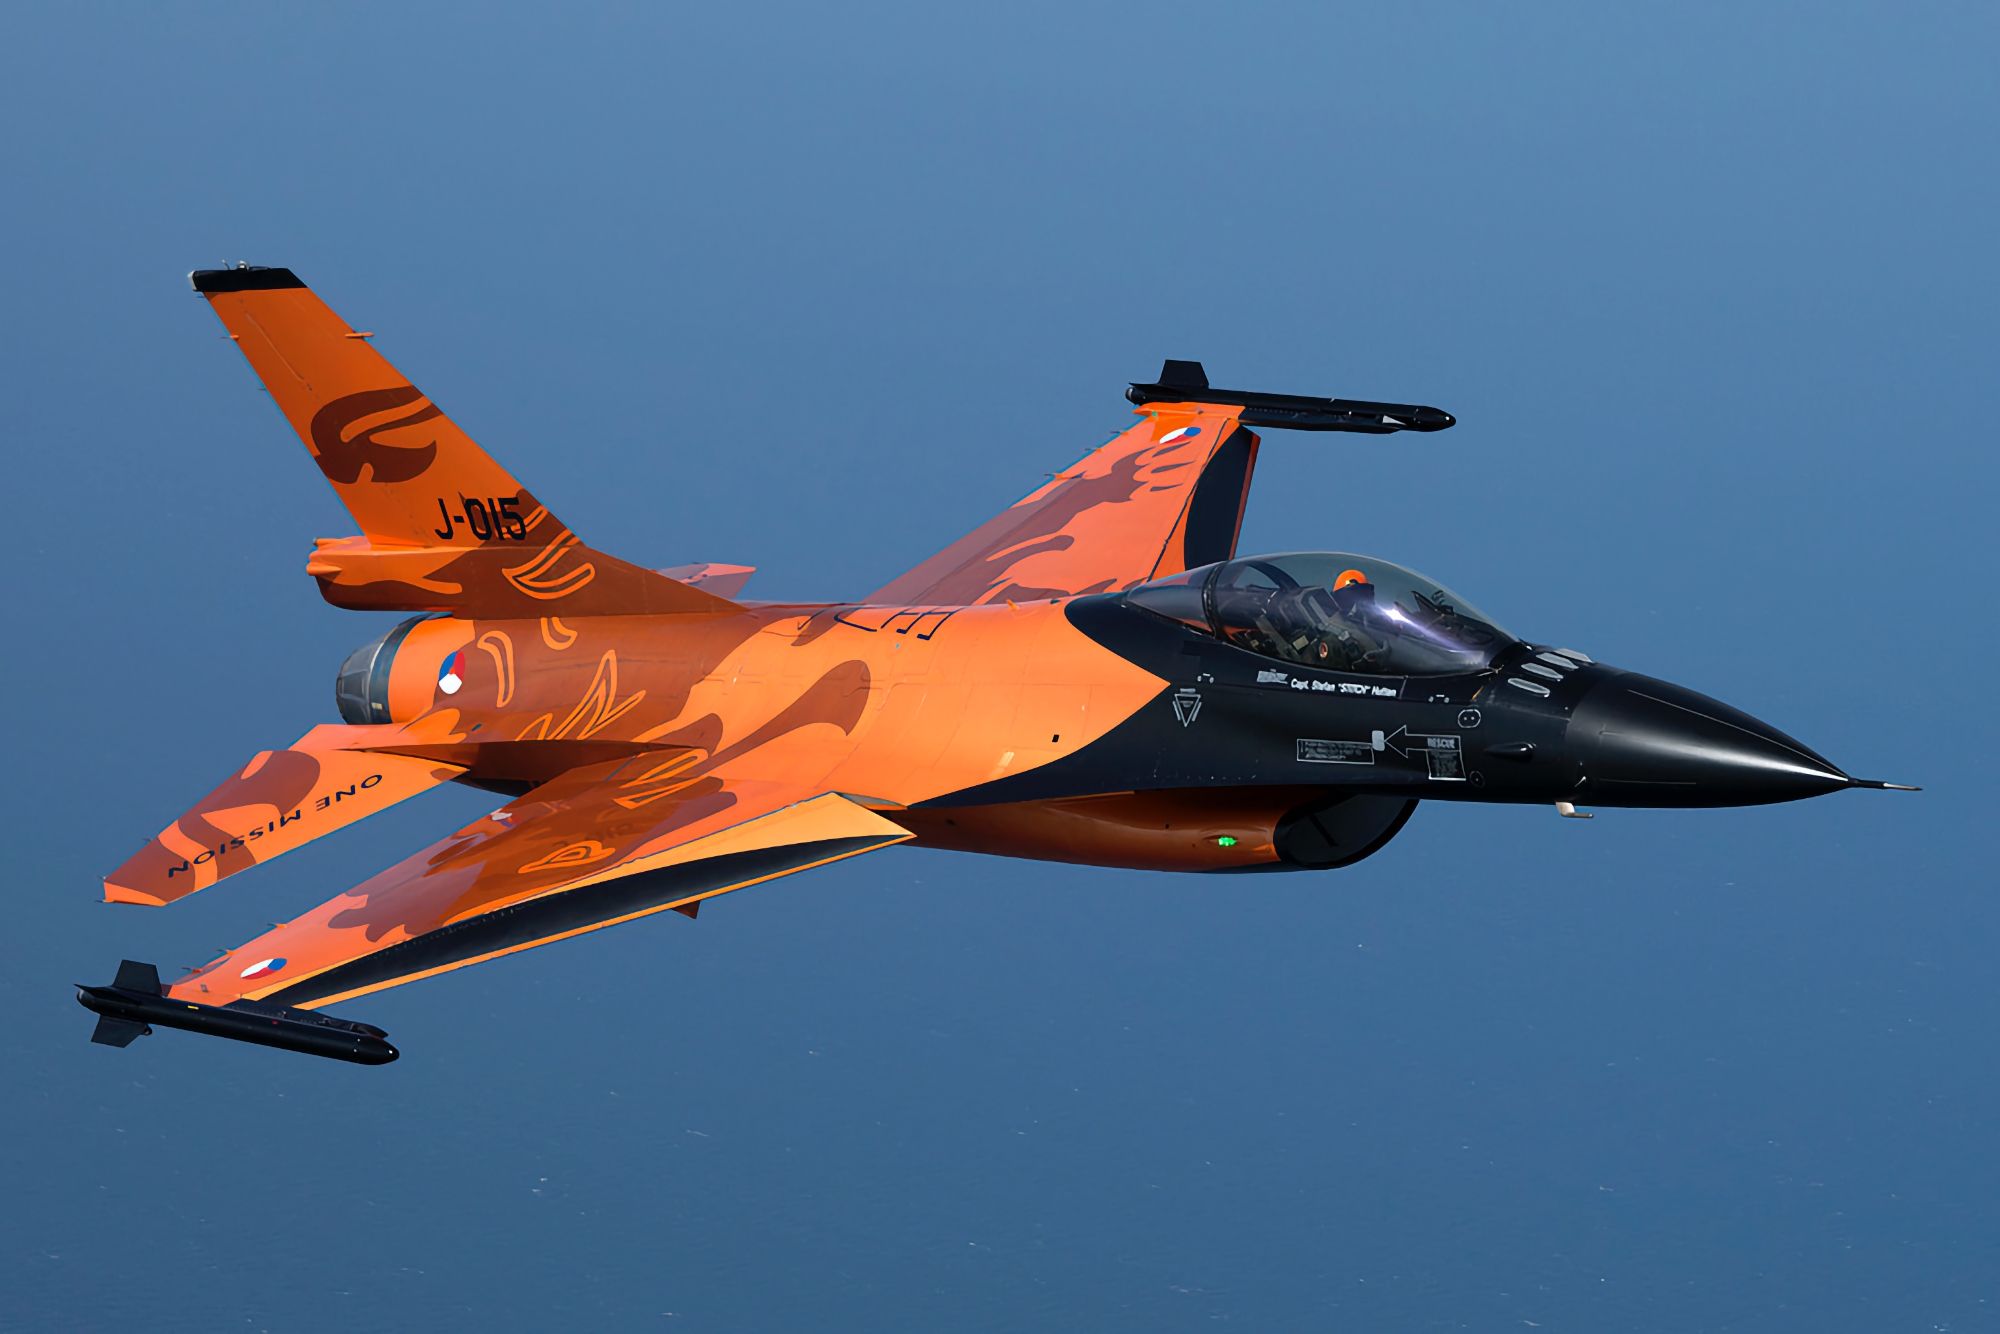 Official: Netherlands to transfer 24 F-16 Fighting Falcon fighters to Ukraine